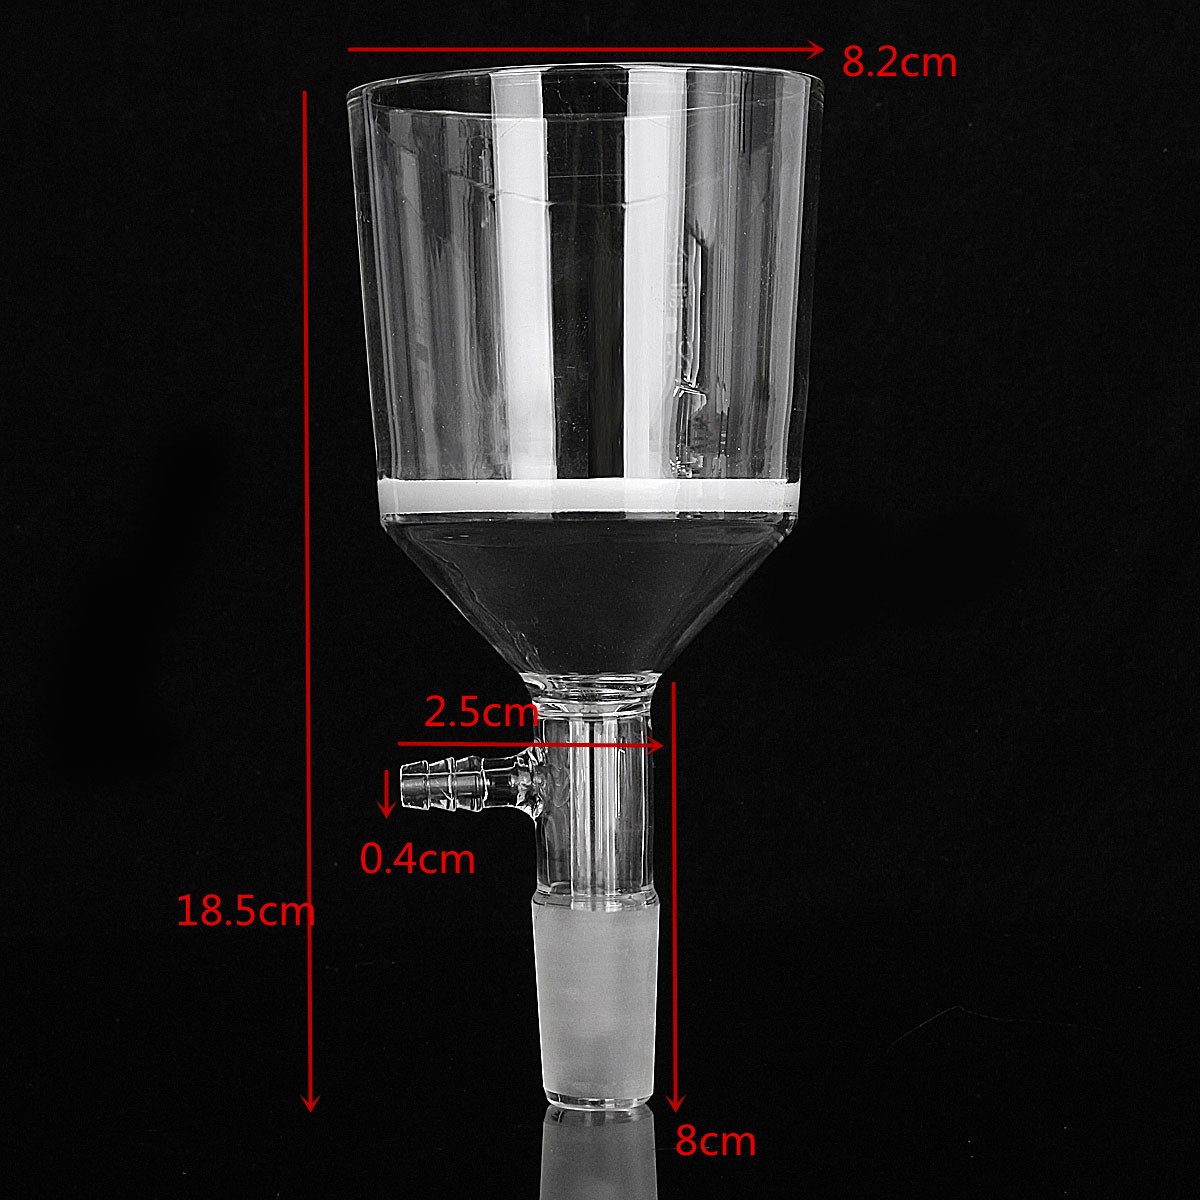 500mL-2429-Joint-Suction-Filtration-Equipment-Glass-Buchner-Funnel-Conical-Flask-Filter-Kit-1115186-7